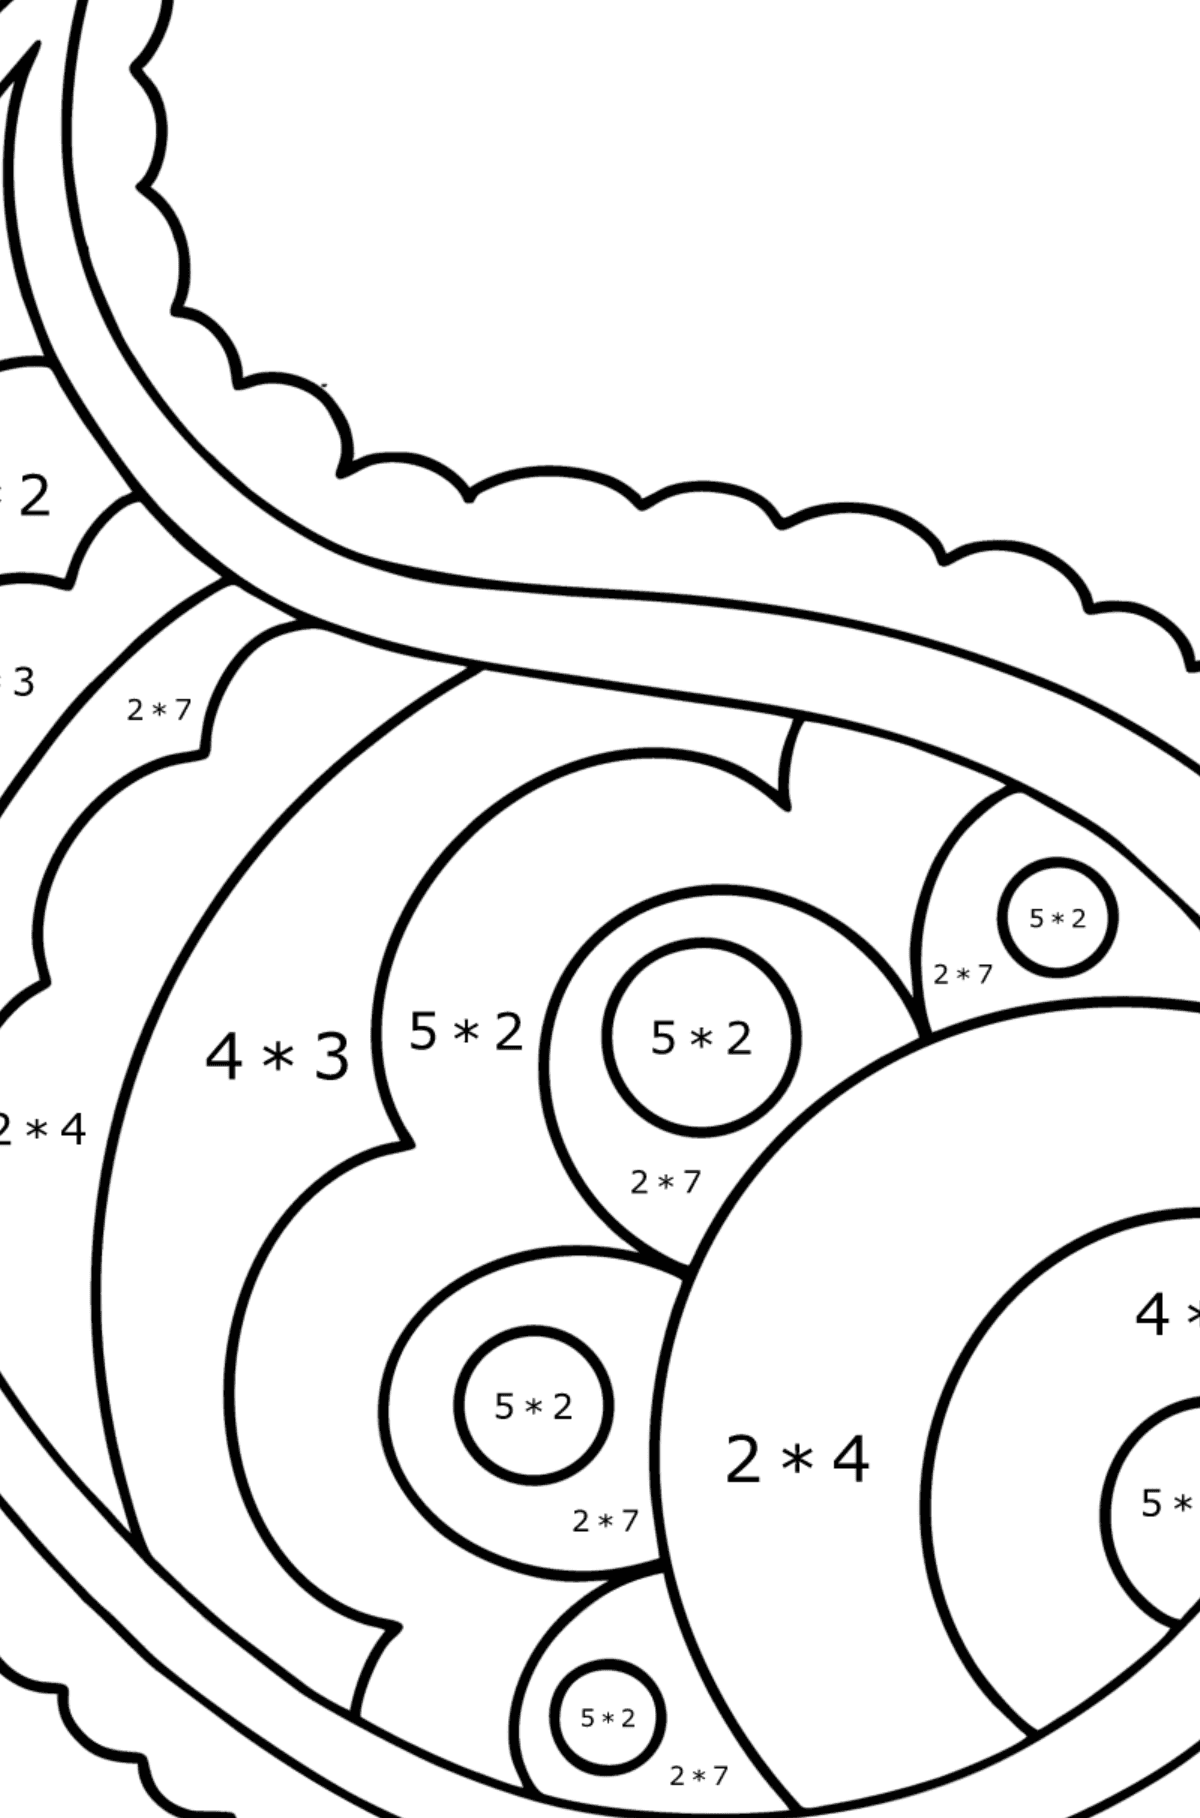 Paisley coloring page - 17 Elements - Math Coloring - Multiplication for Kids